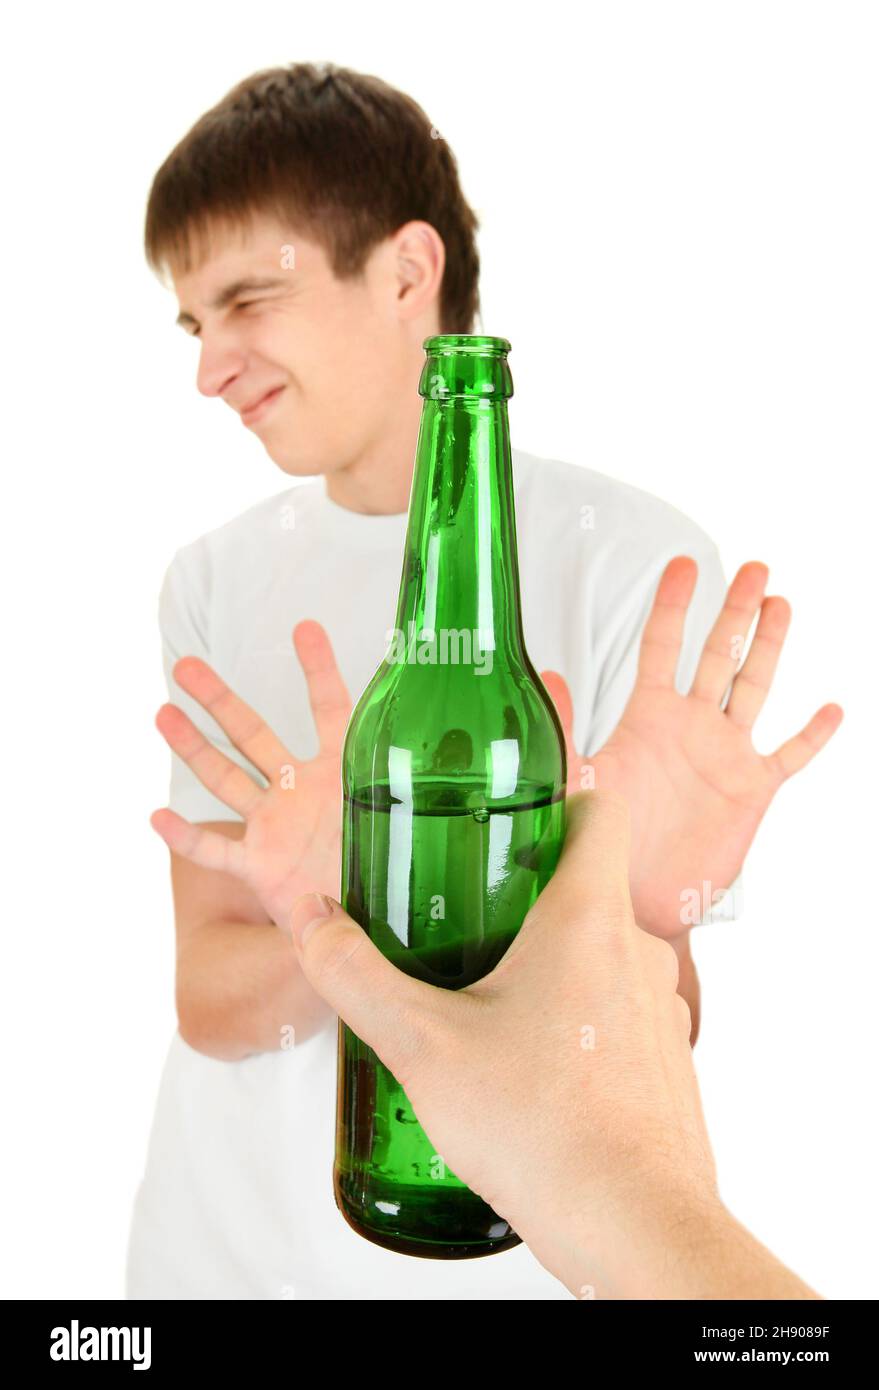 Teenager refuse a Bottle of the Beer on the White Background Stock Photo